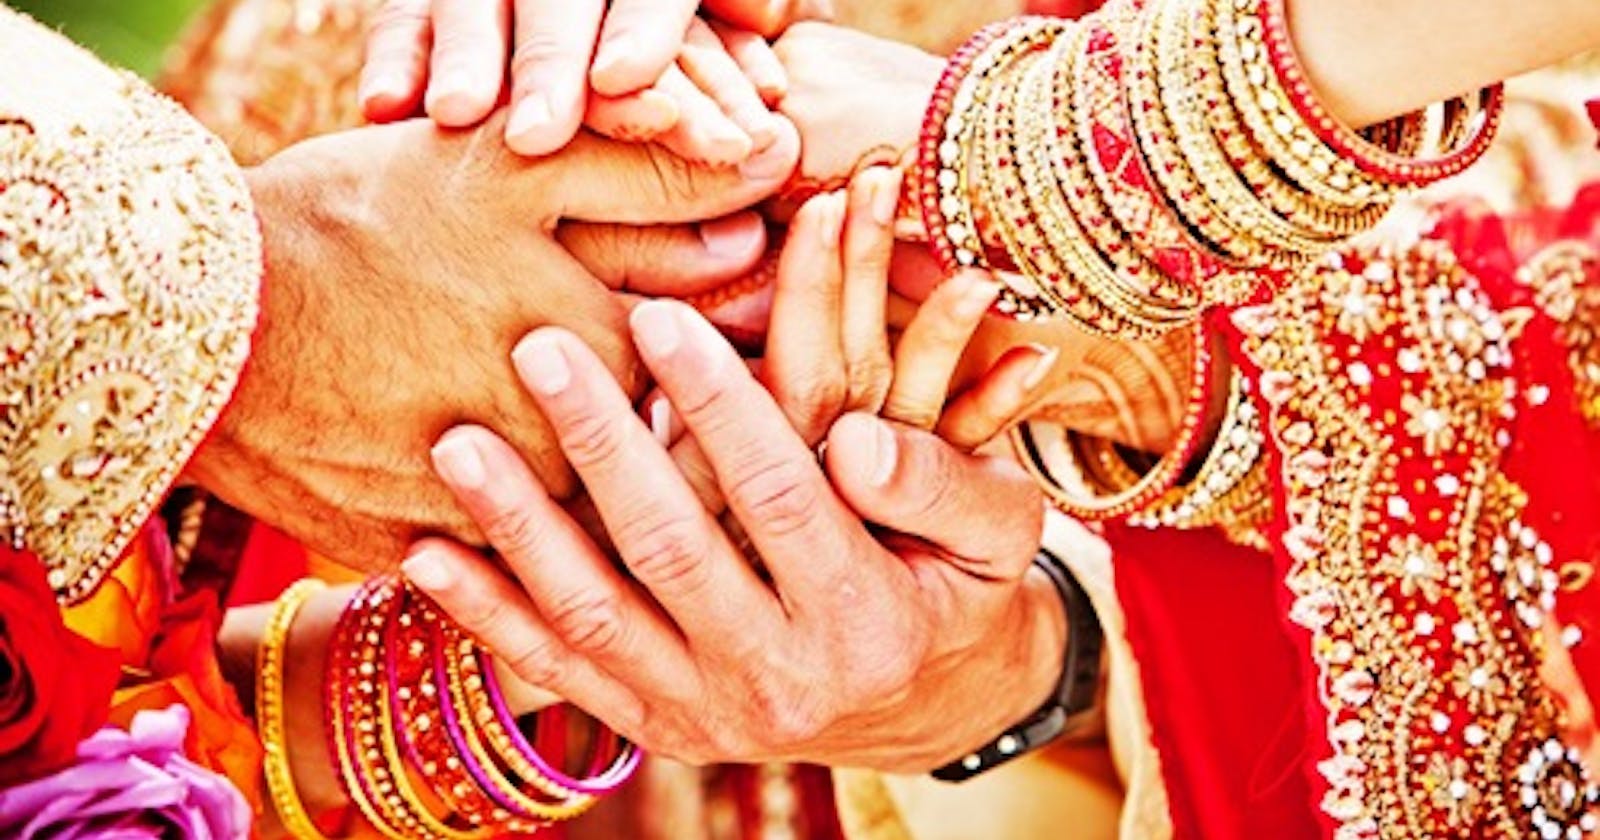 How do Matrimonial sites help in finding partner from the Saini Community?